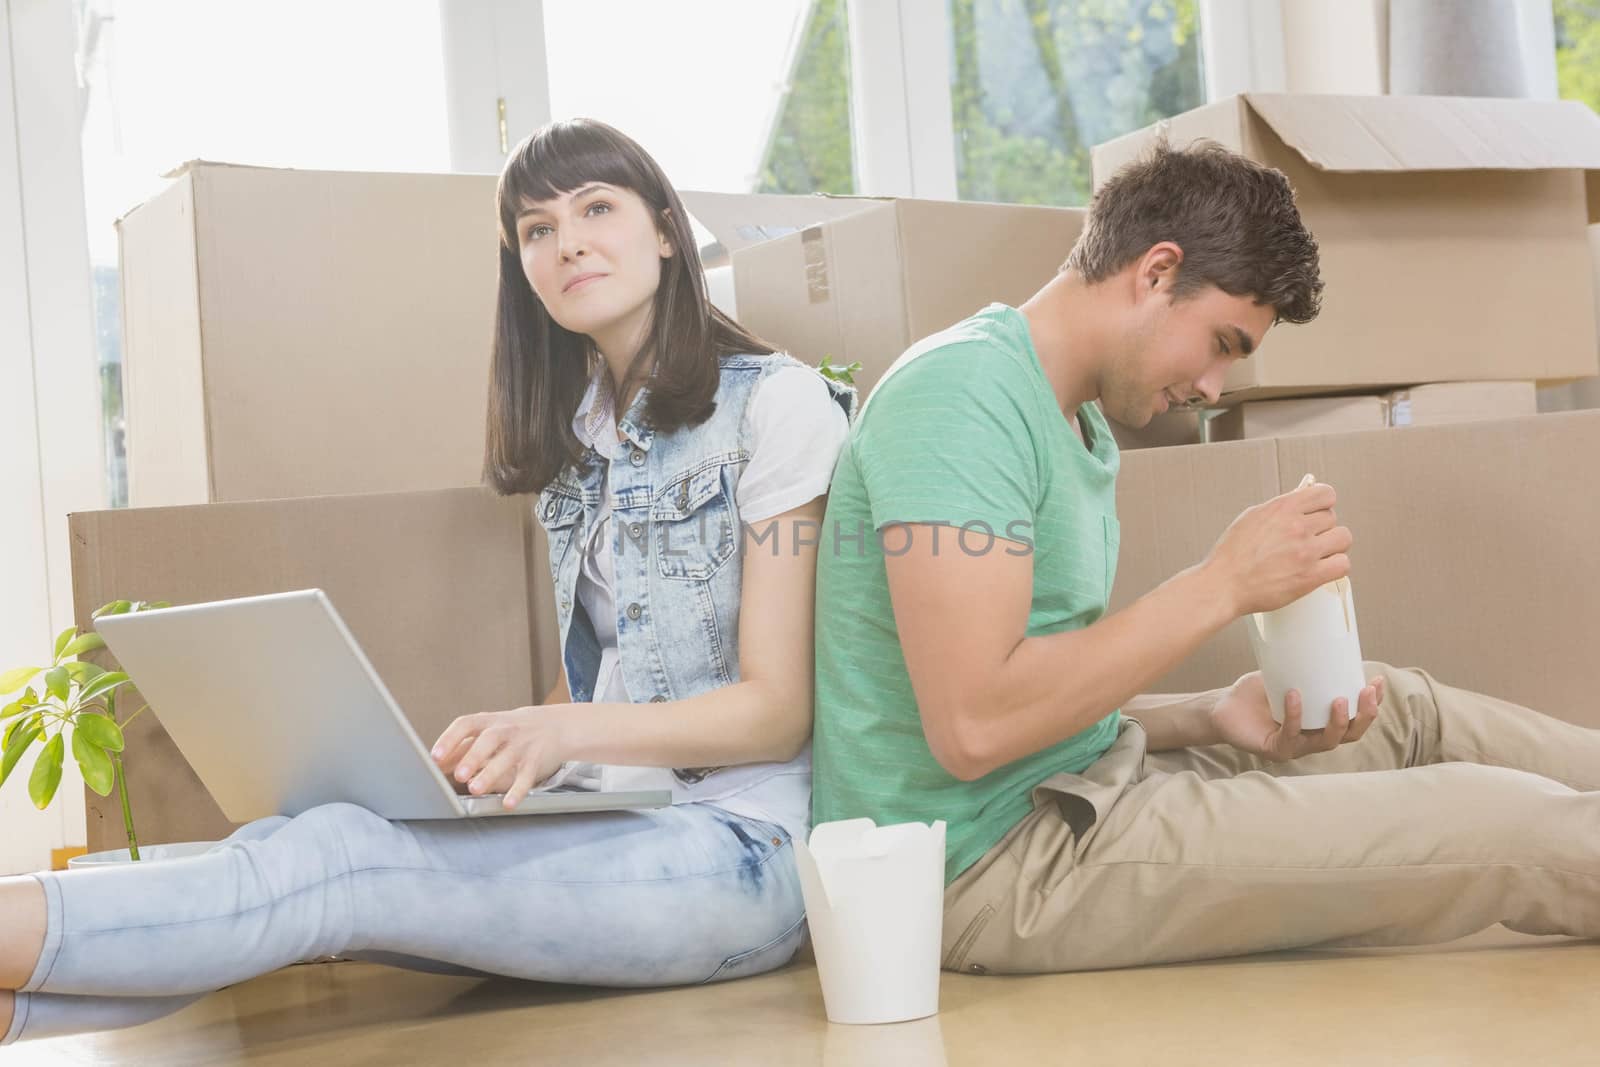 Young couple eating noodle and using laptop in their new house